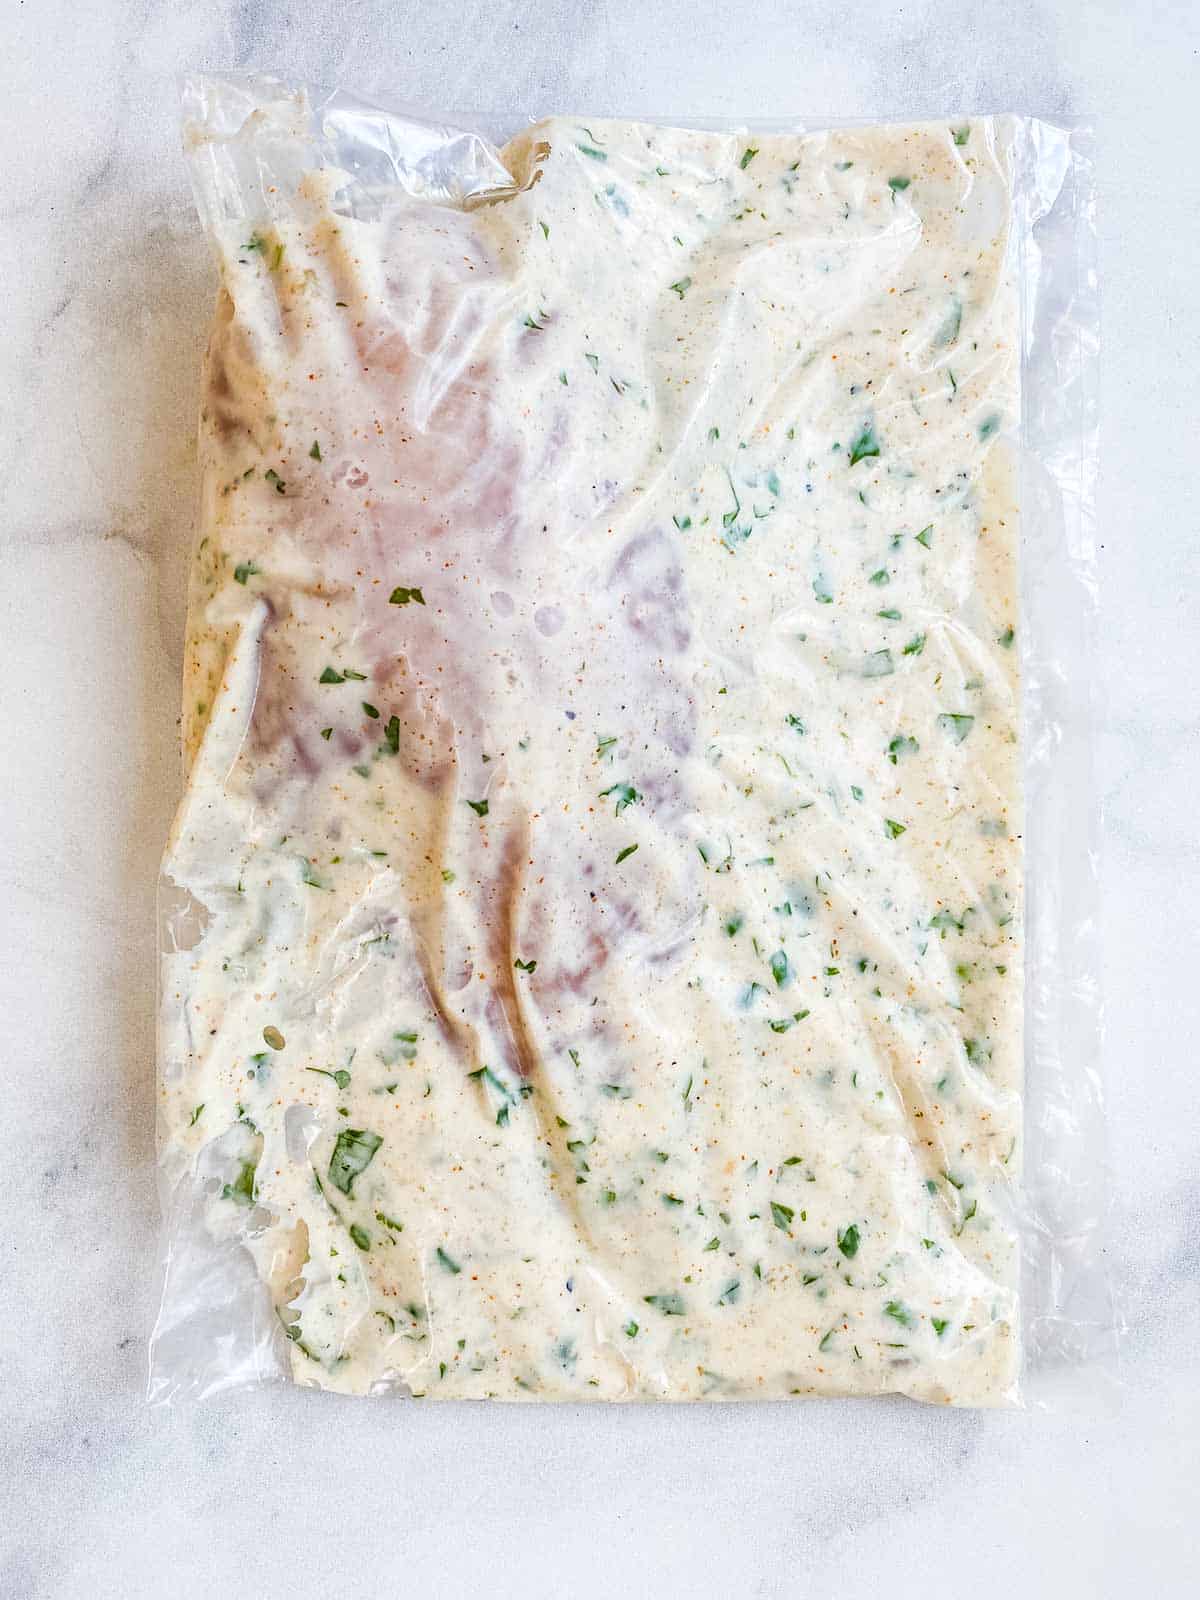 Chicken breast and marinade in a baggie on a white marble table.